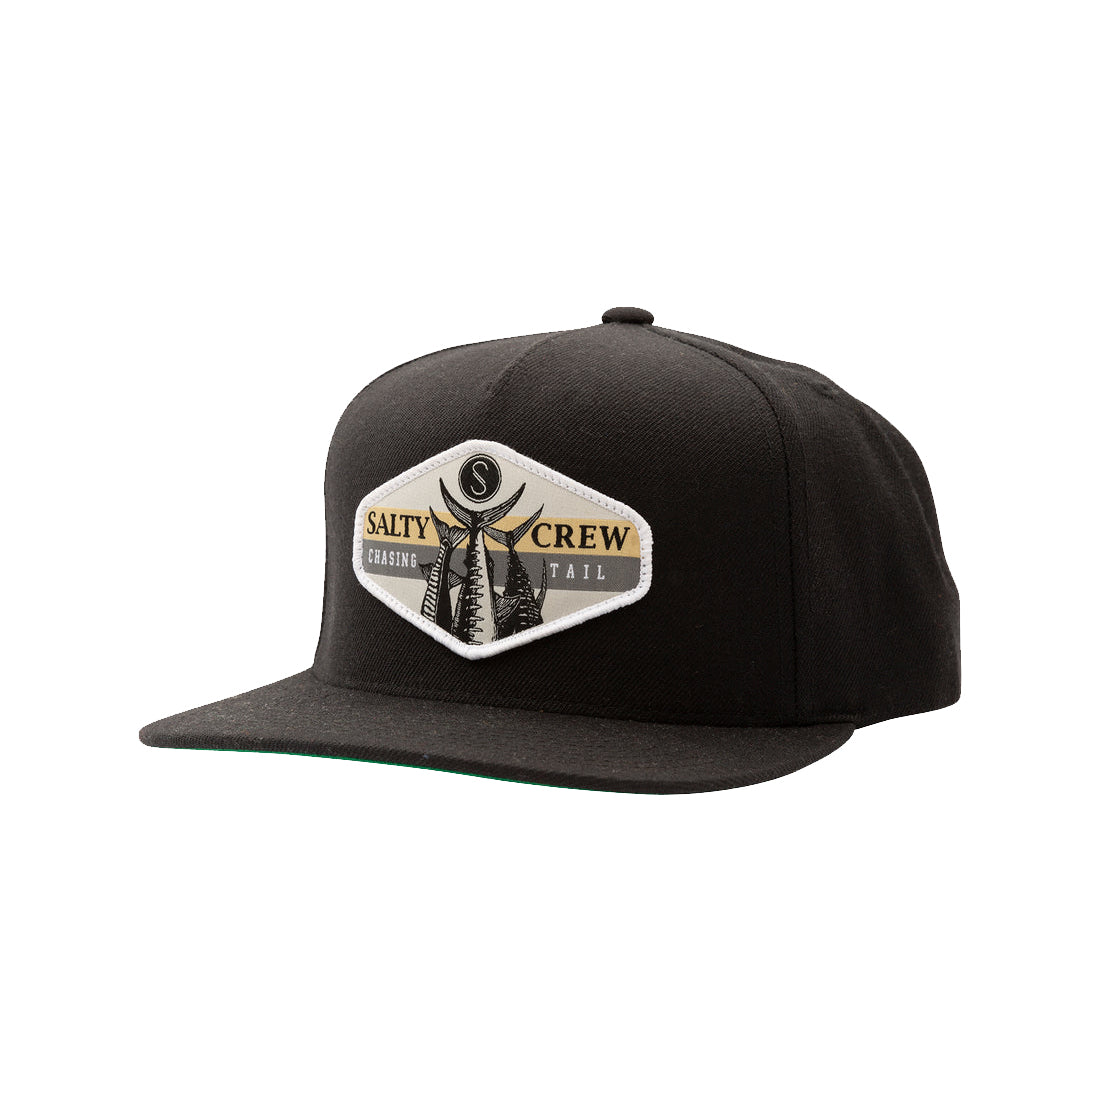 Salty Crew High Tail 5 Panel Hat Black One Size